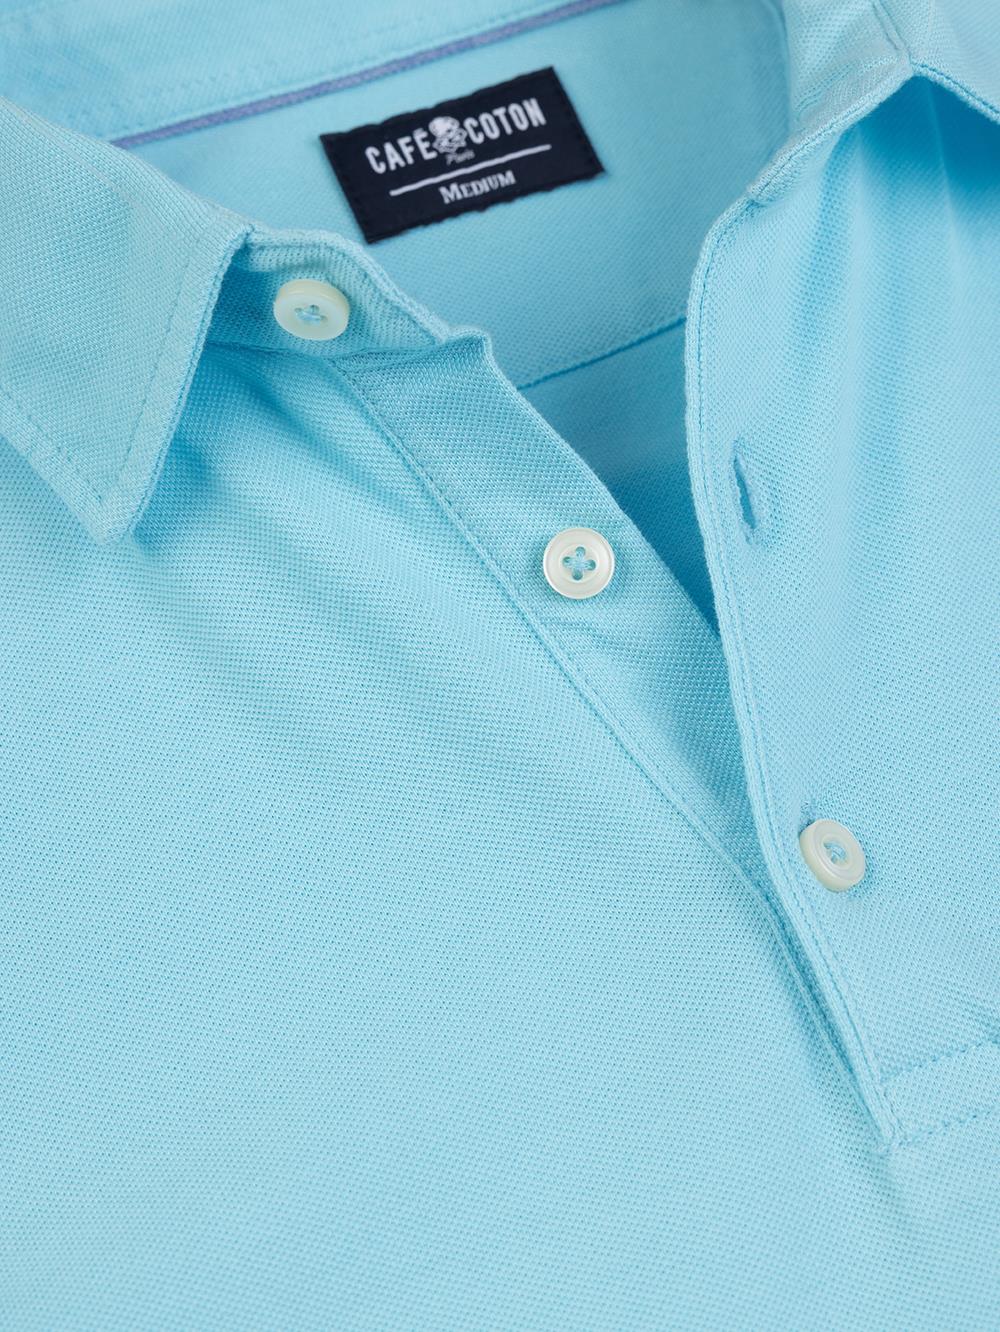 Heritage polo in turquoise piqué